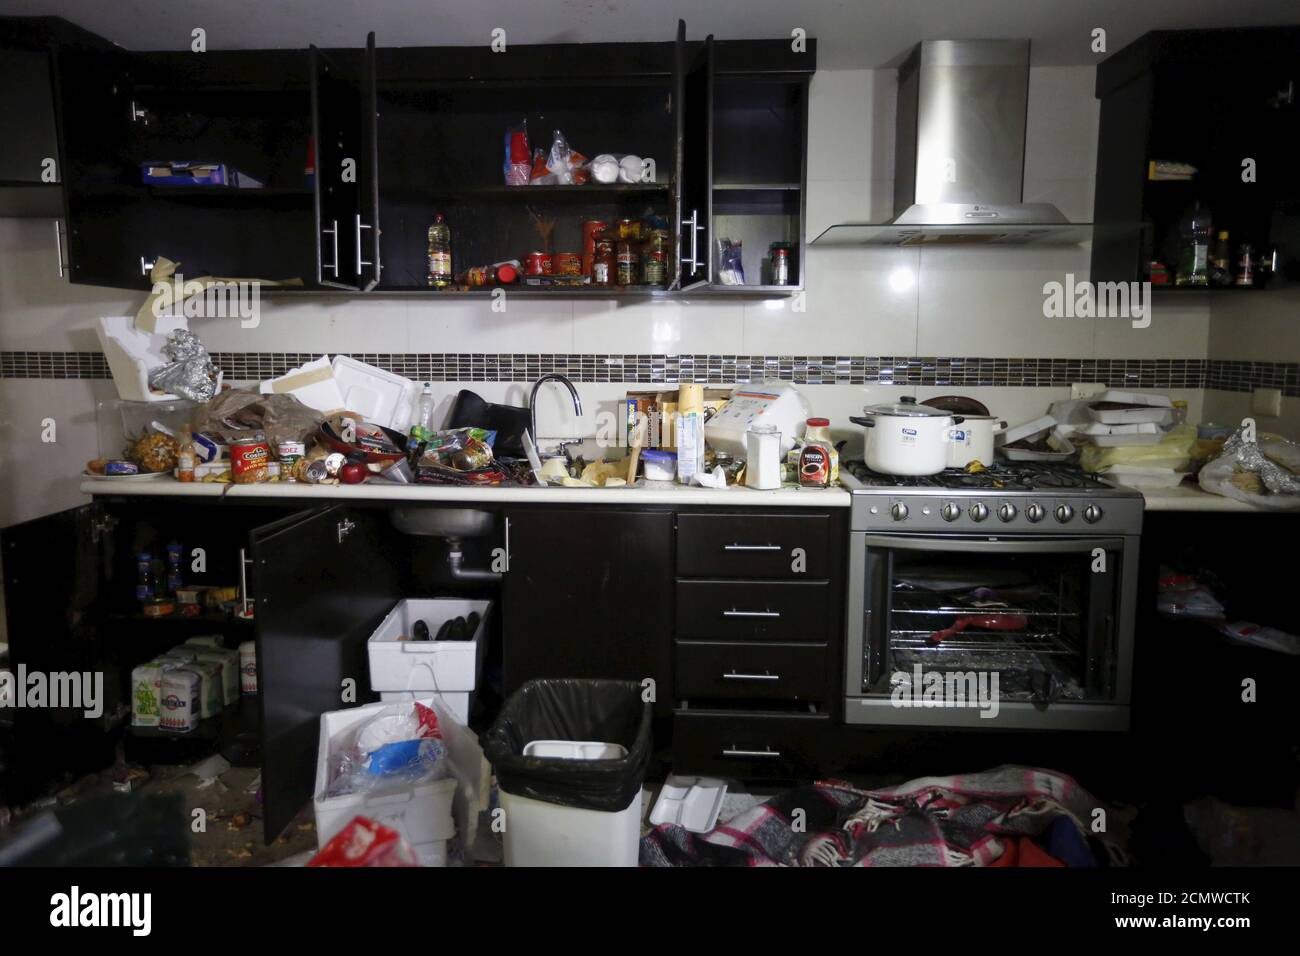 The kitchen at a safe house, where five people were shot dead during an operation to recapture the drug lord Joaquin 'El Chapo' Guzman, is seen at Jiquilpan Boulevard in Los Mochis in Sinaloa state, Mexico, January 11, 2016. REUTERS/Edgard Garrido Stock Photo